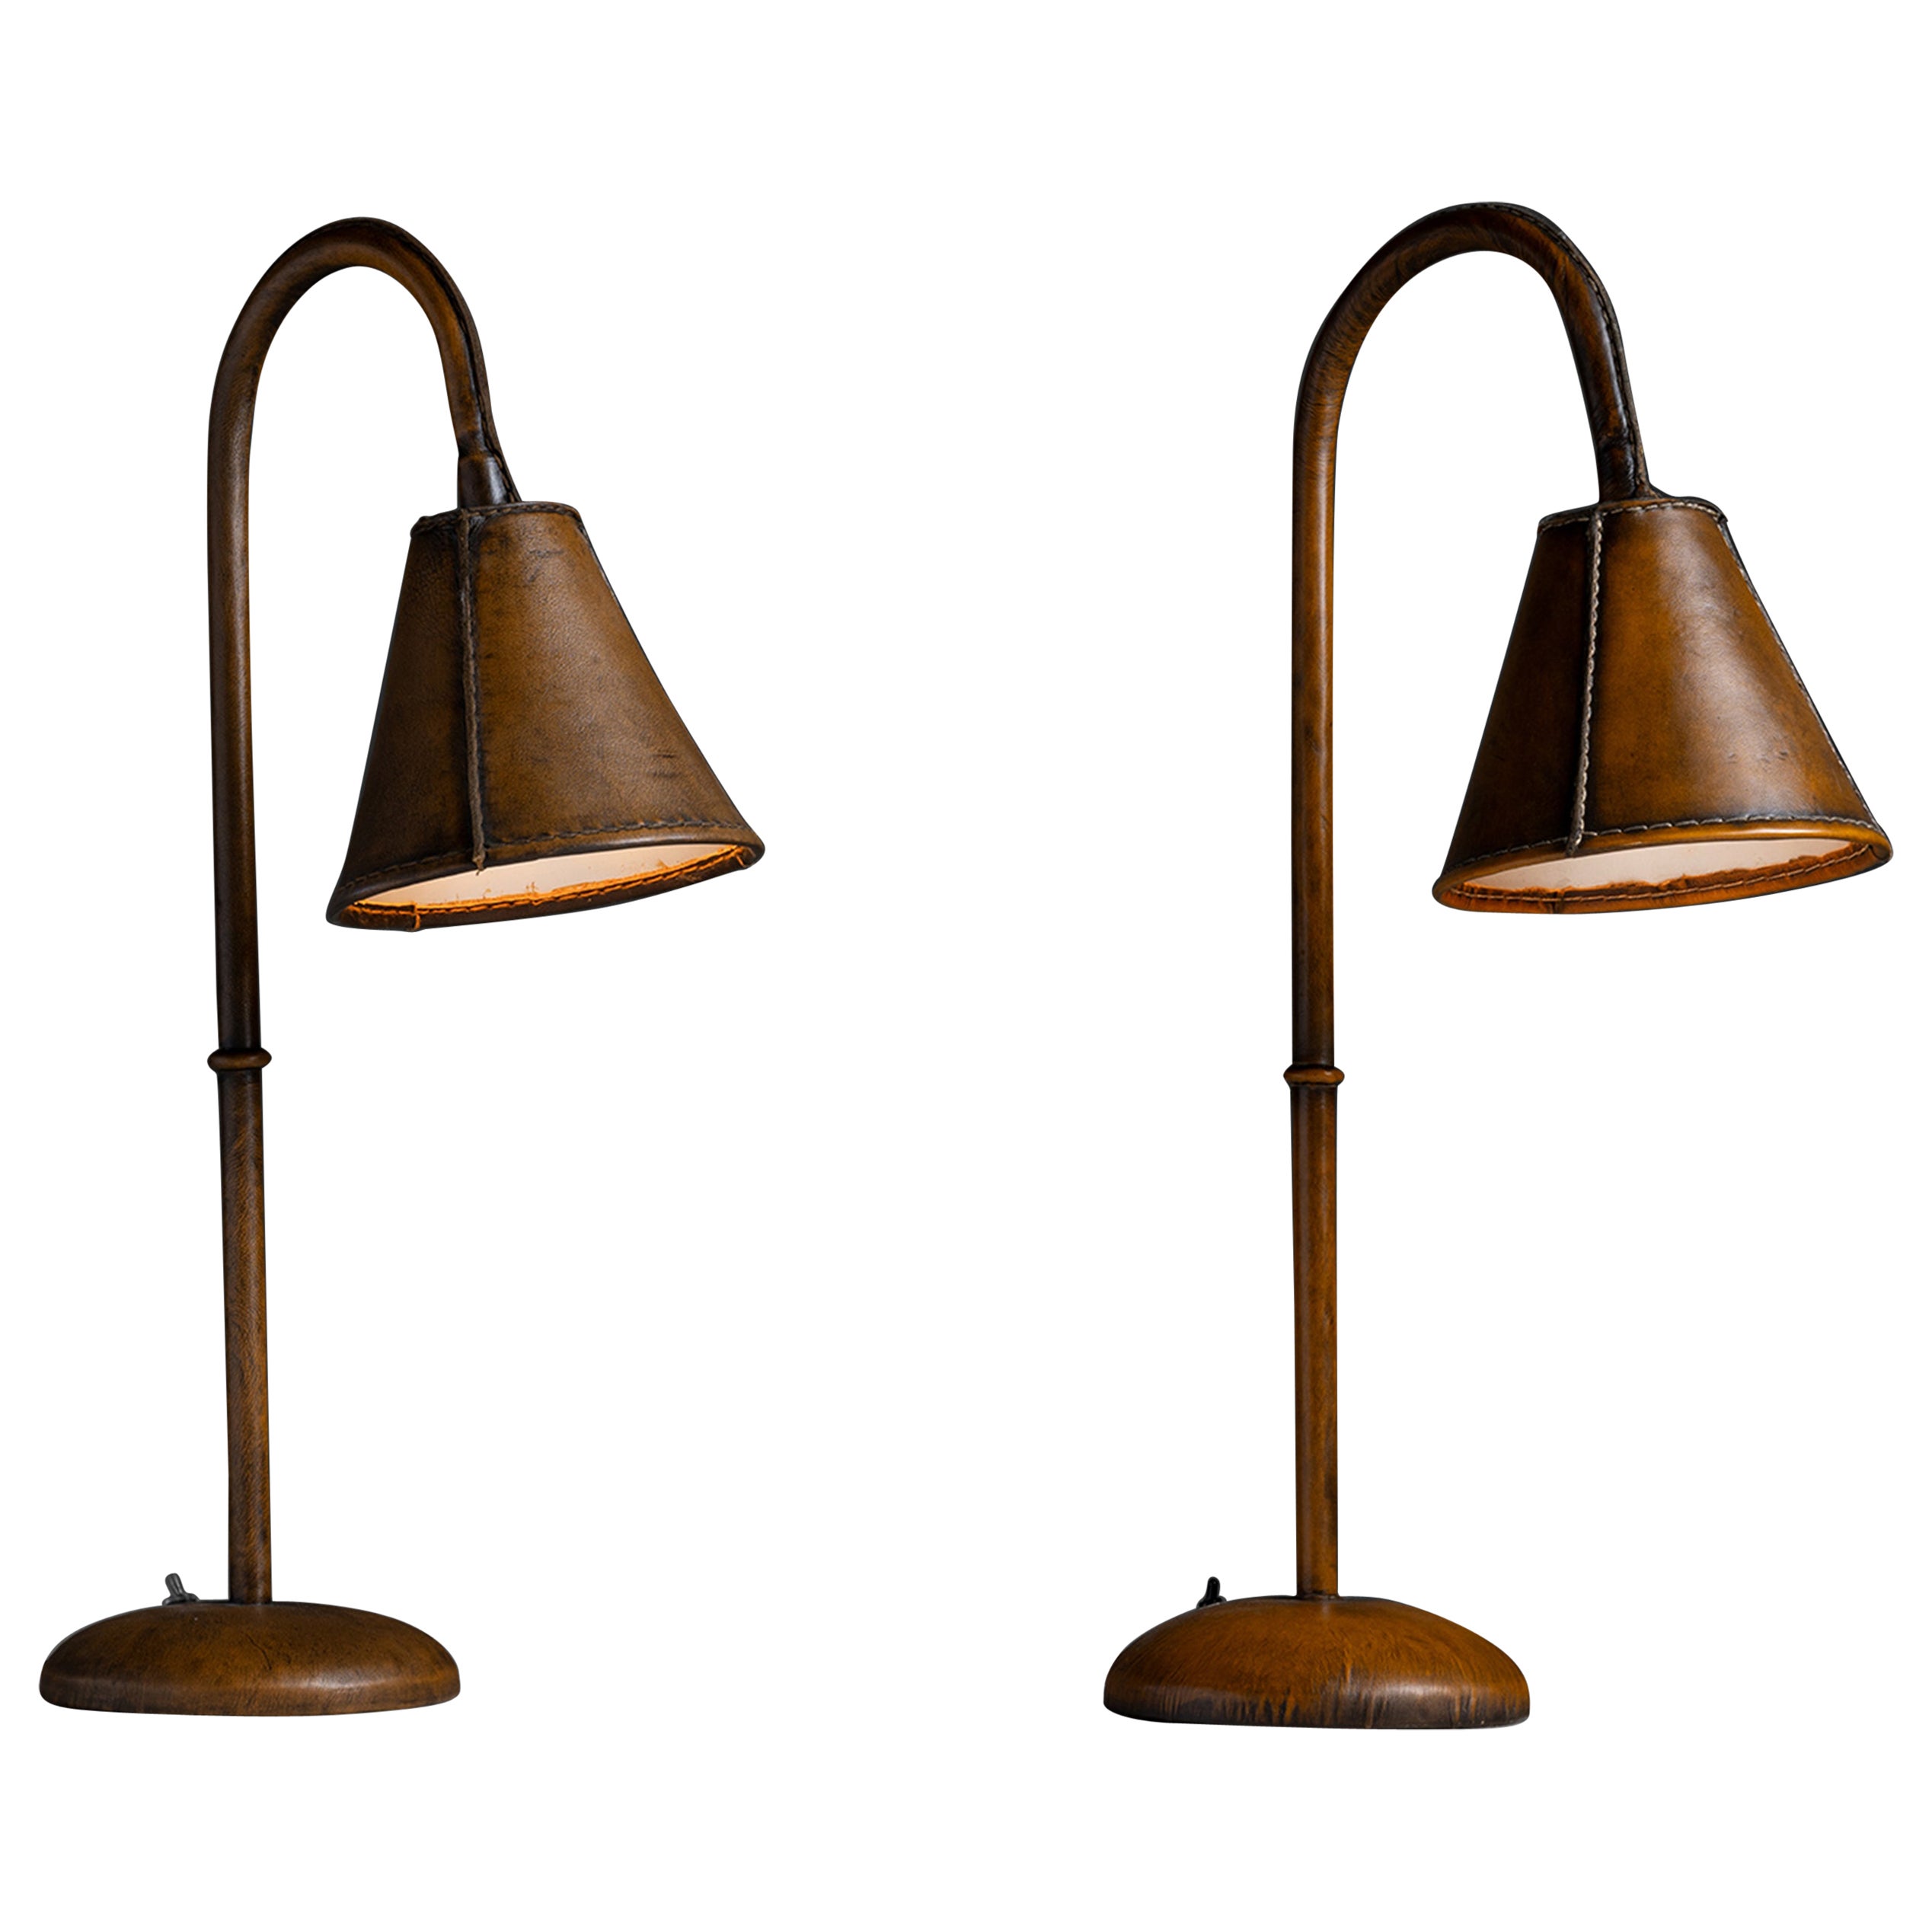 Table Lamps by Valenti, Spain circa 1970